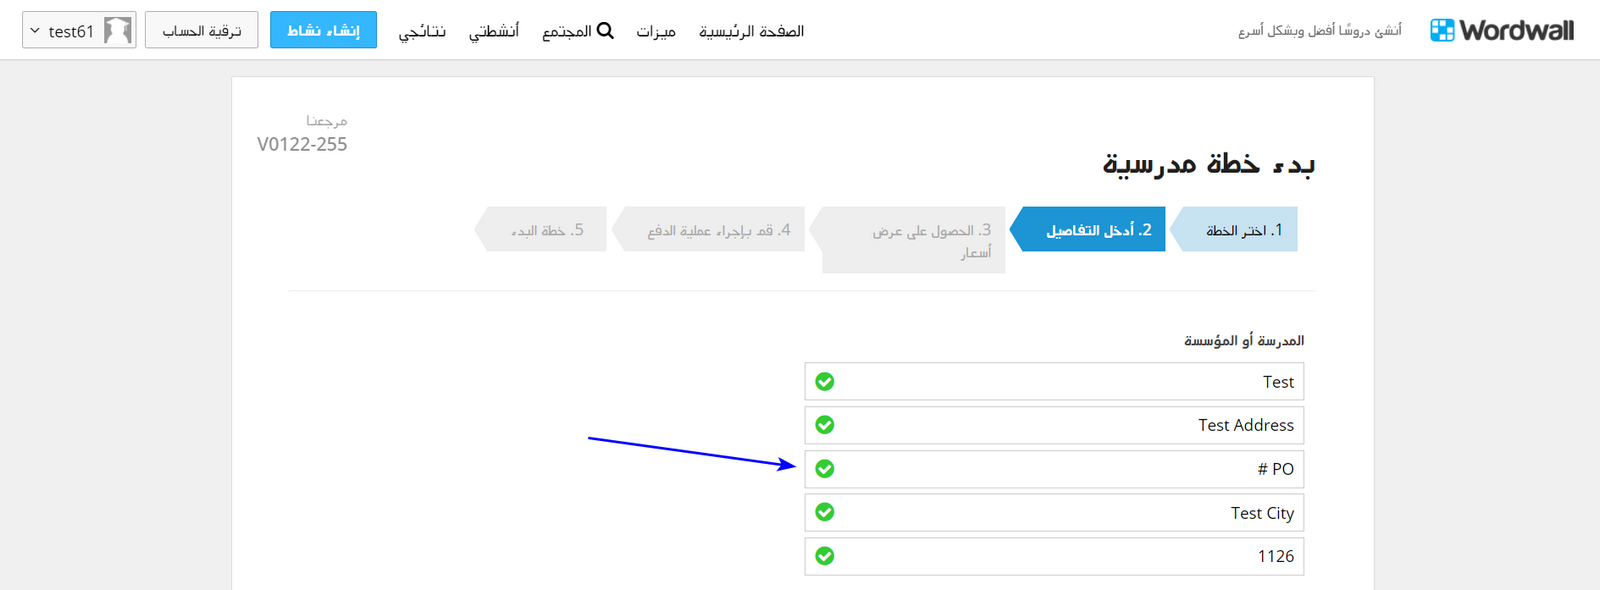 Where_to_send_Purchase_orders_-_Arabic_1.png